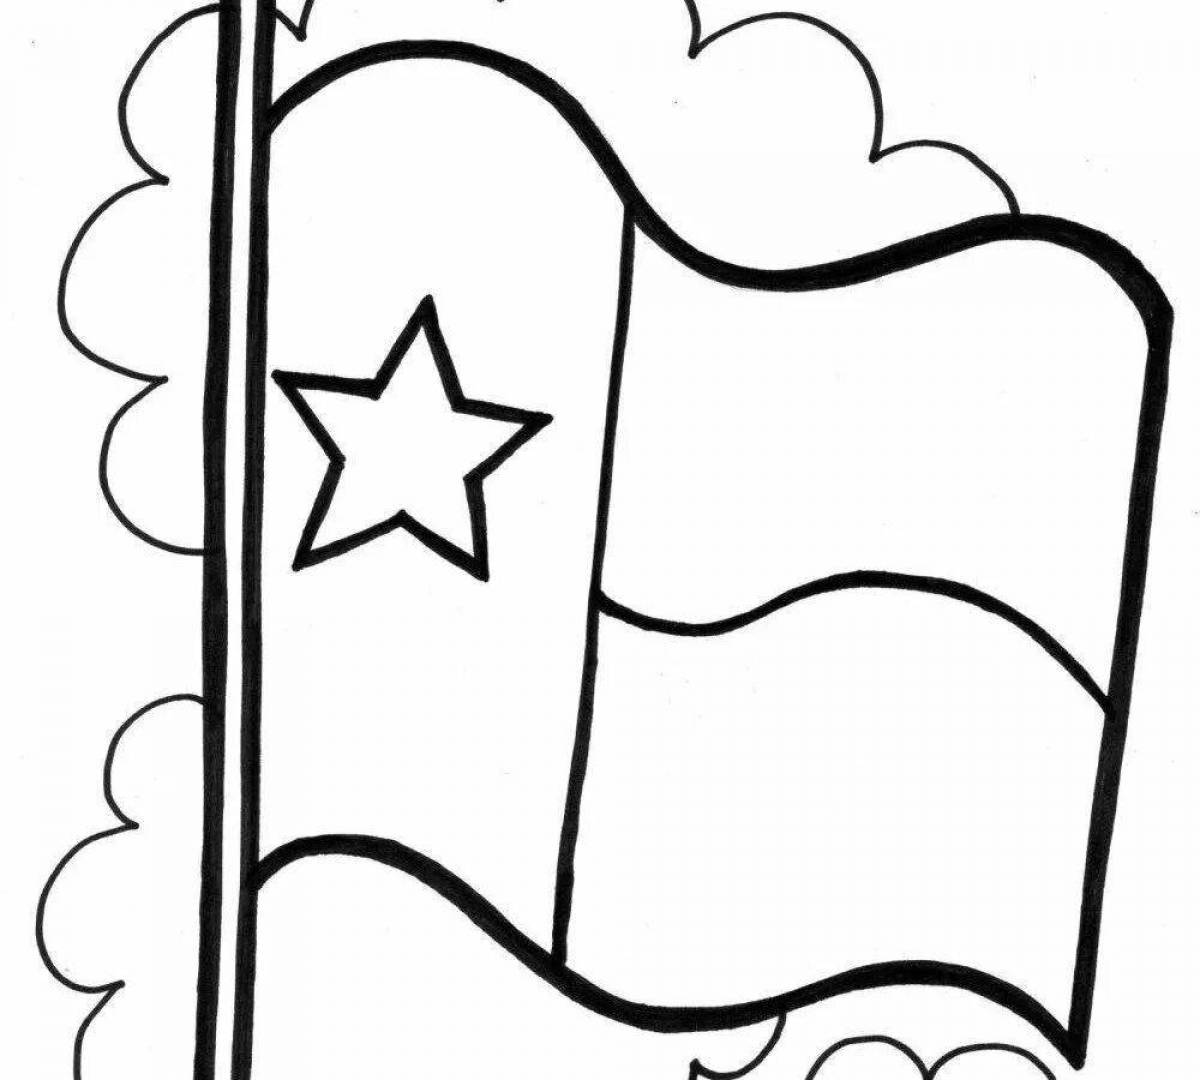 Coloring page inviting Russian flag